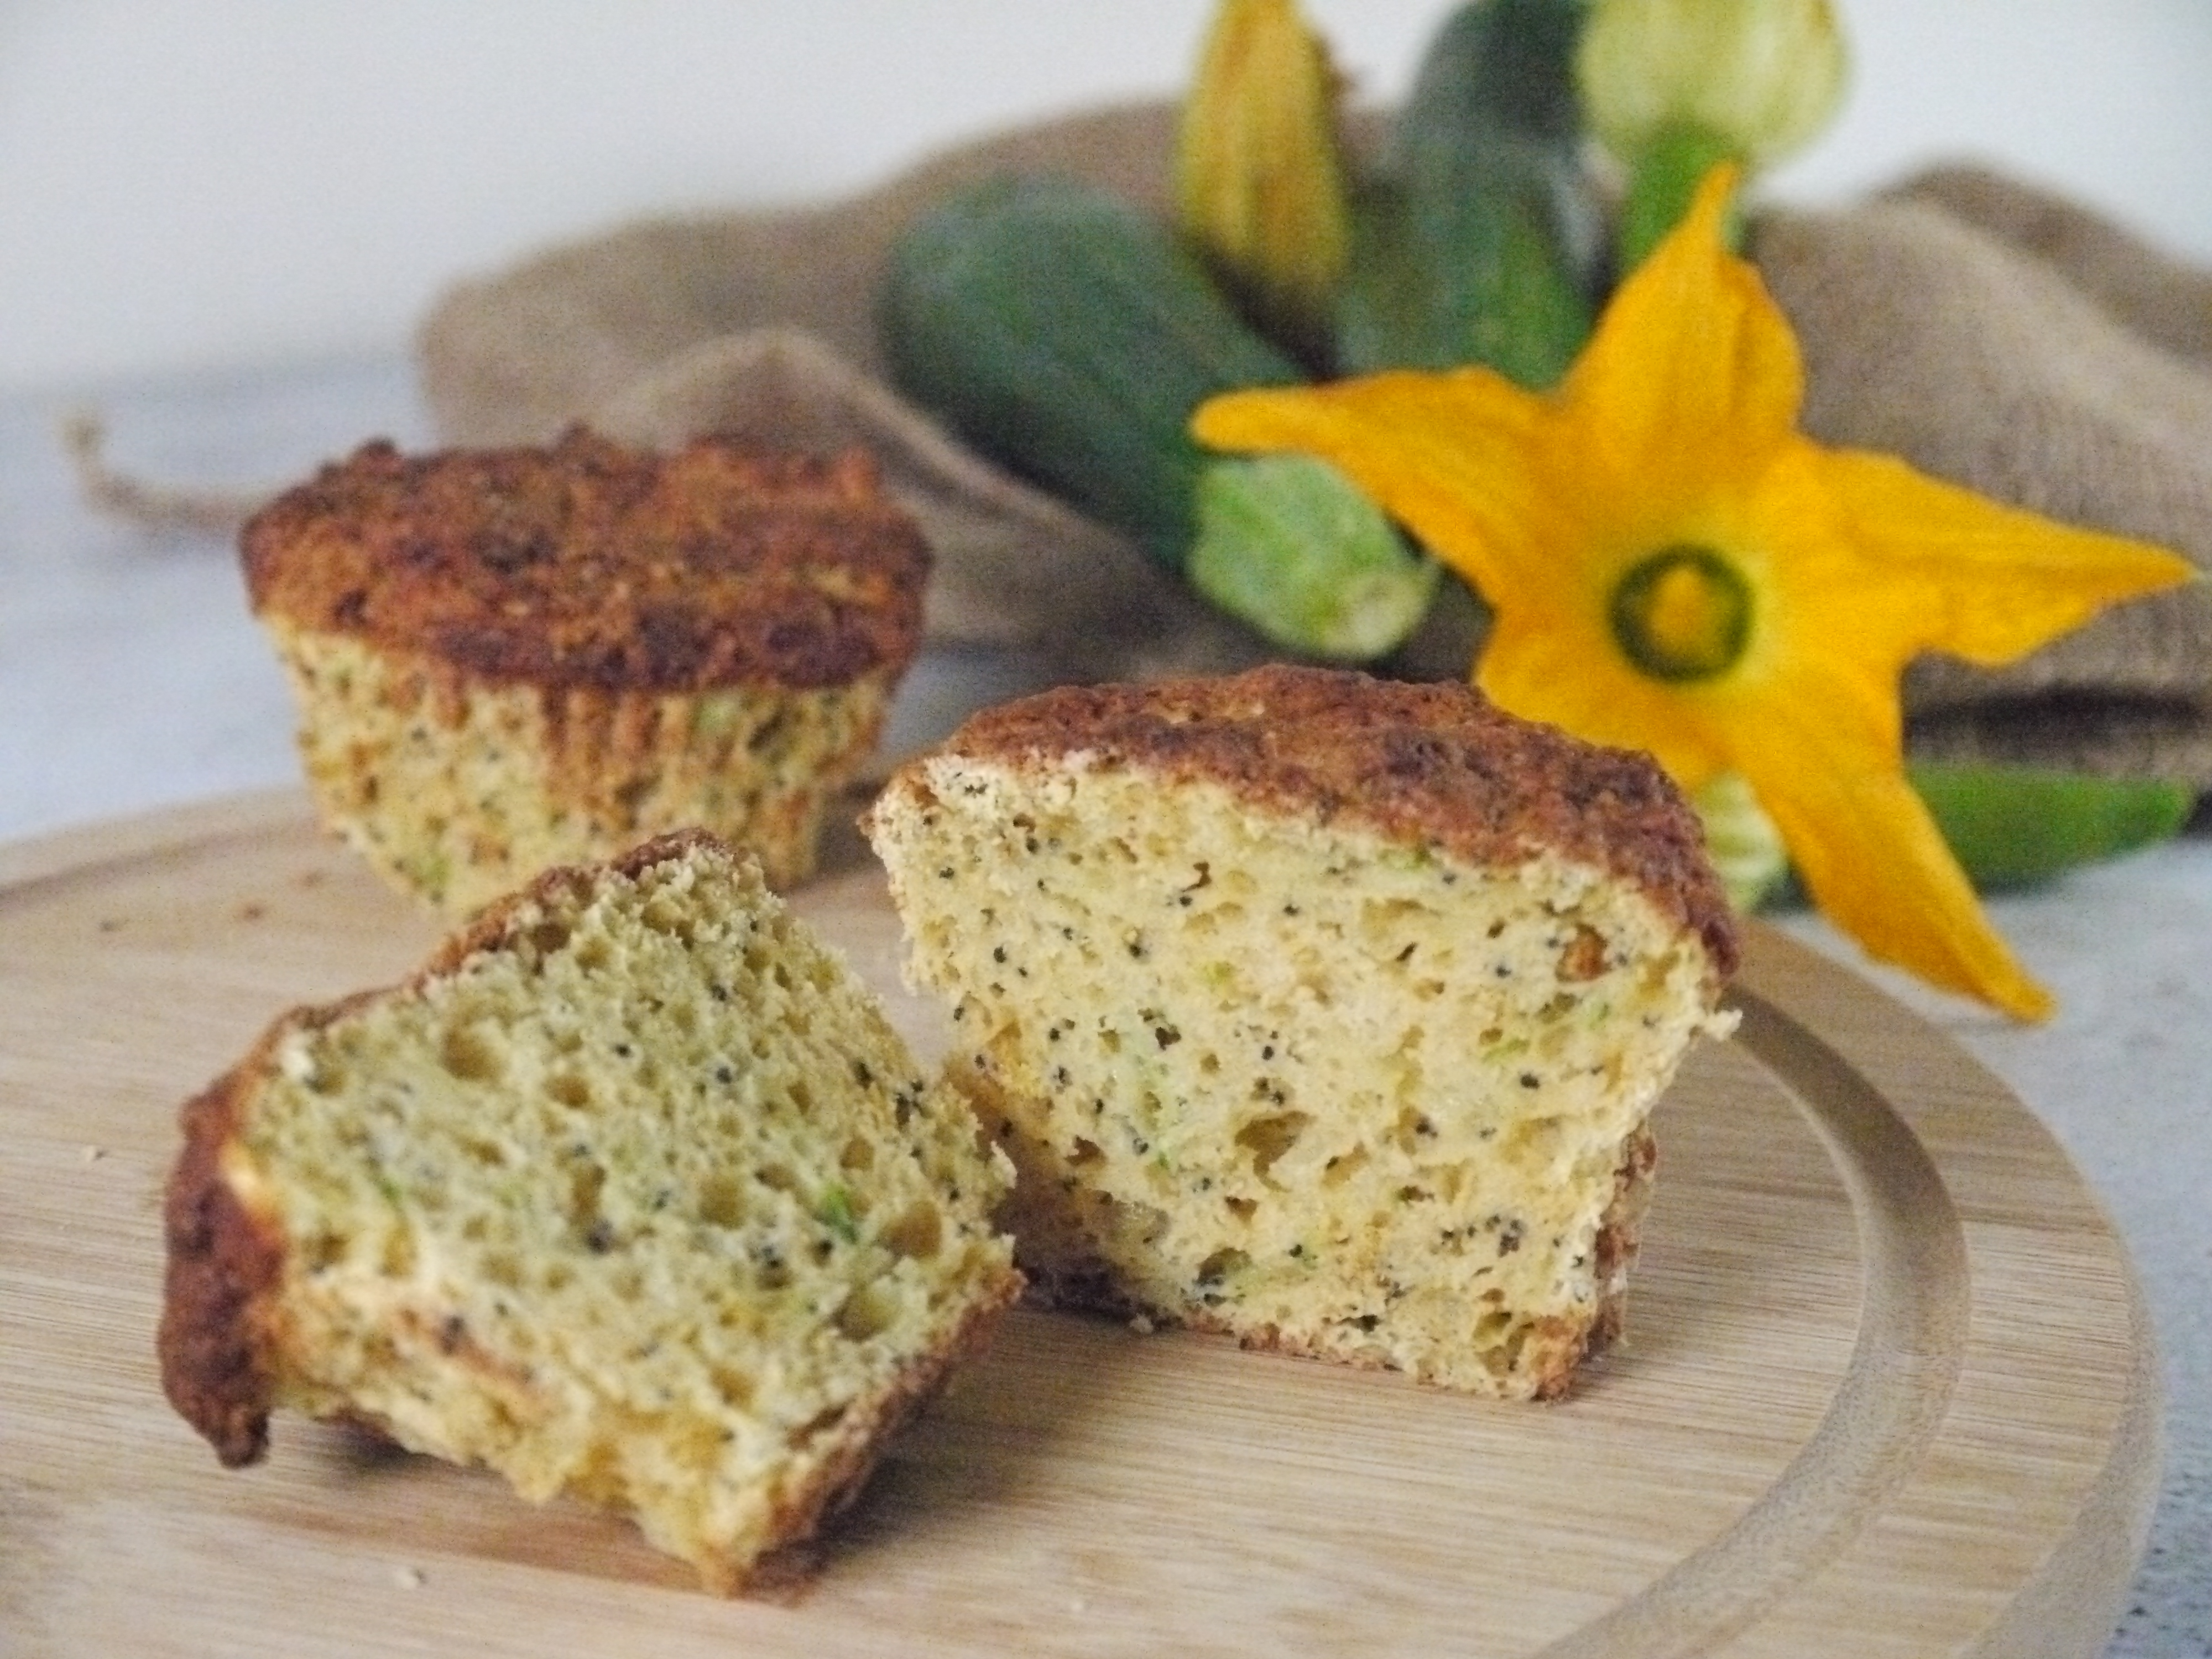 Courgette, Lemon and Poppy Seed Muffins